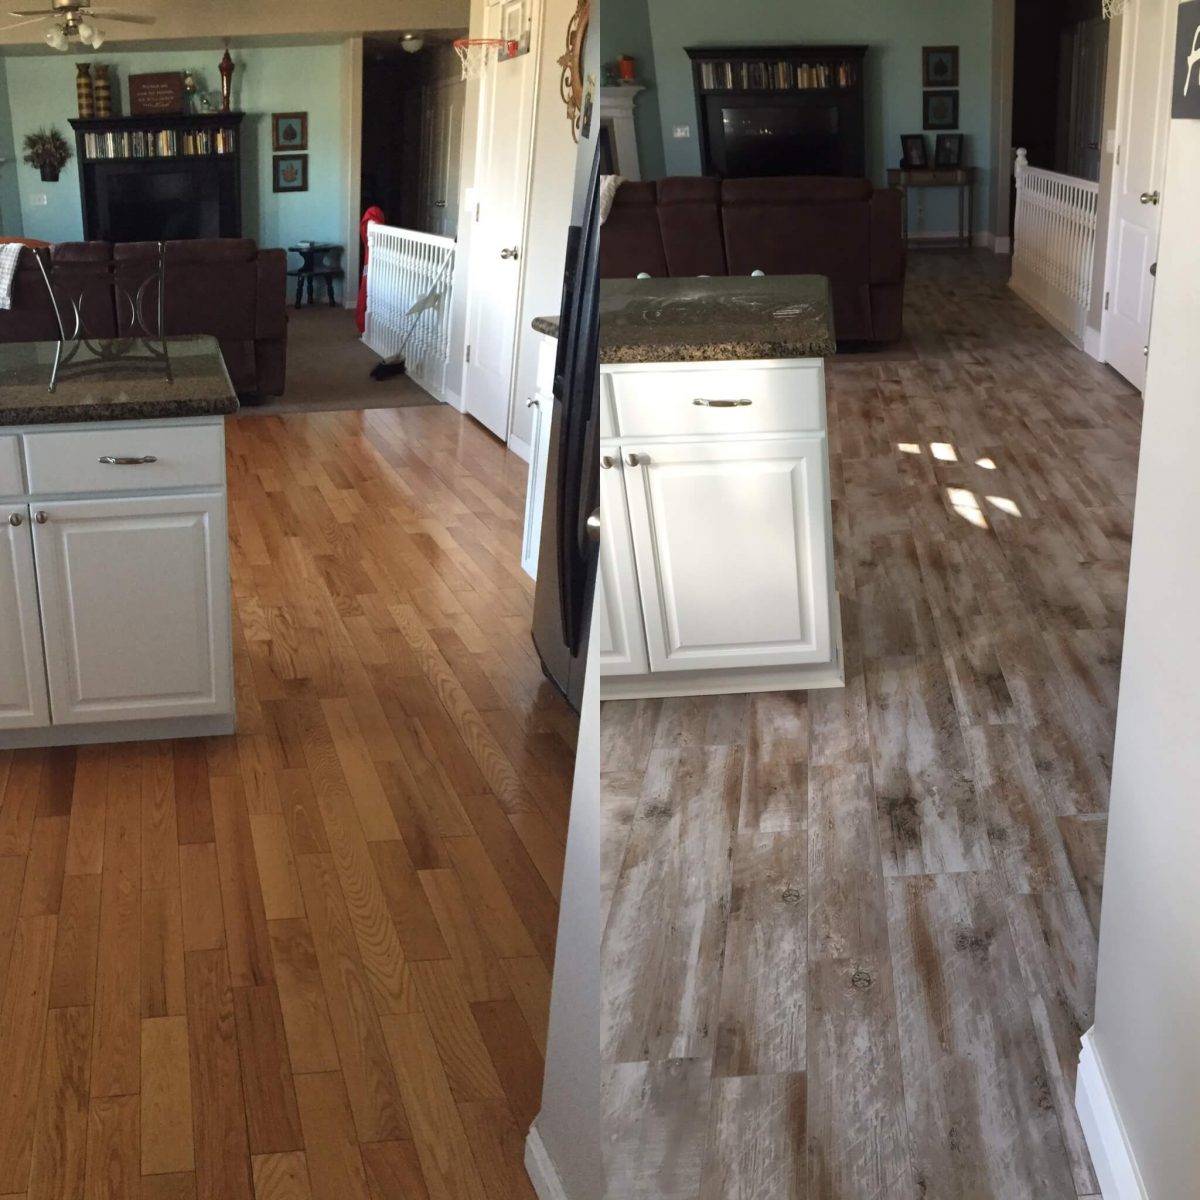 Flooring Before And After Reveal Wood Looking Tile 365 Days Of